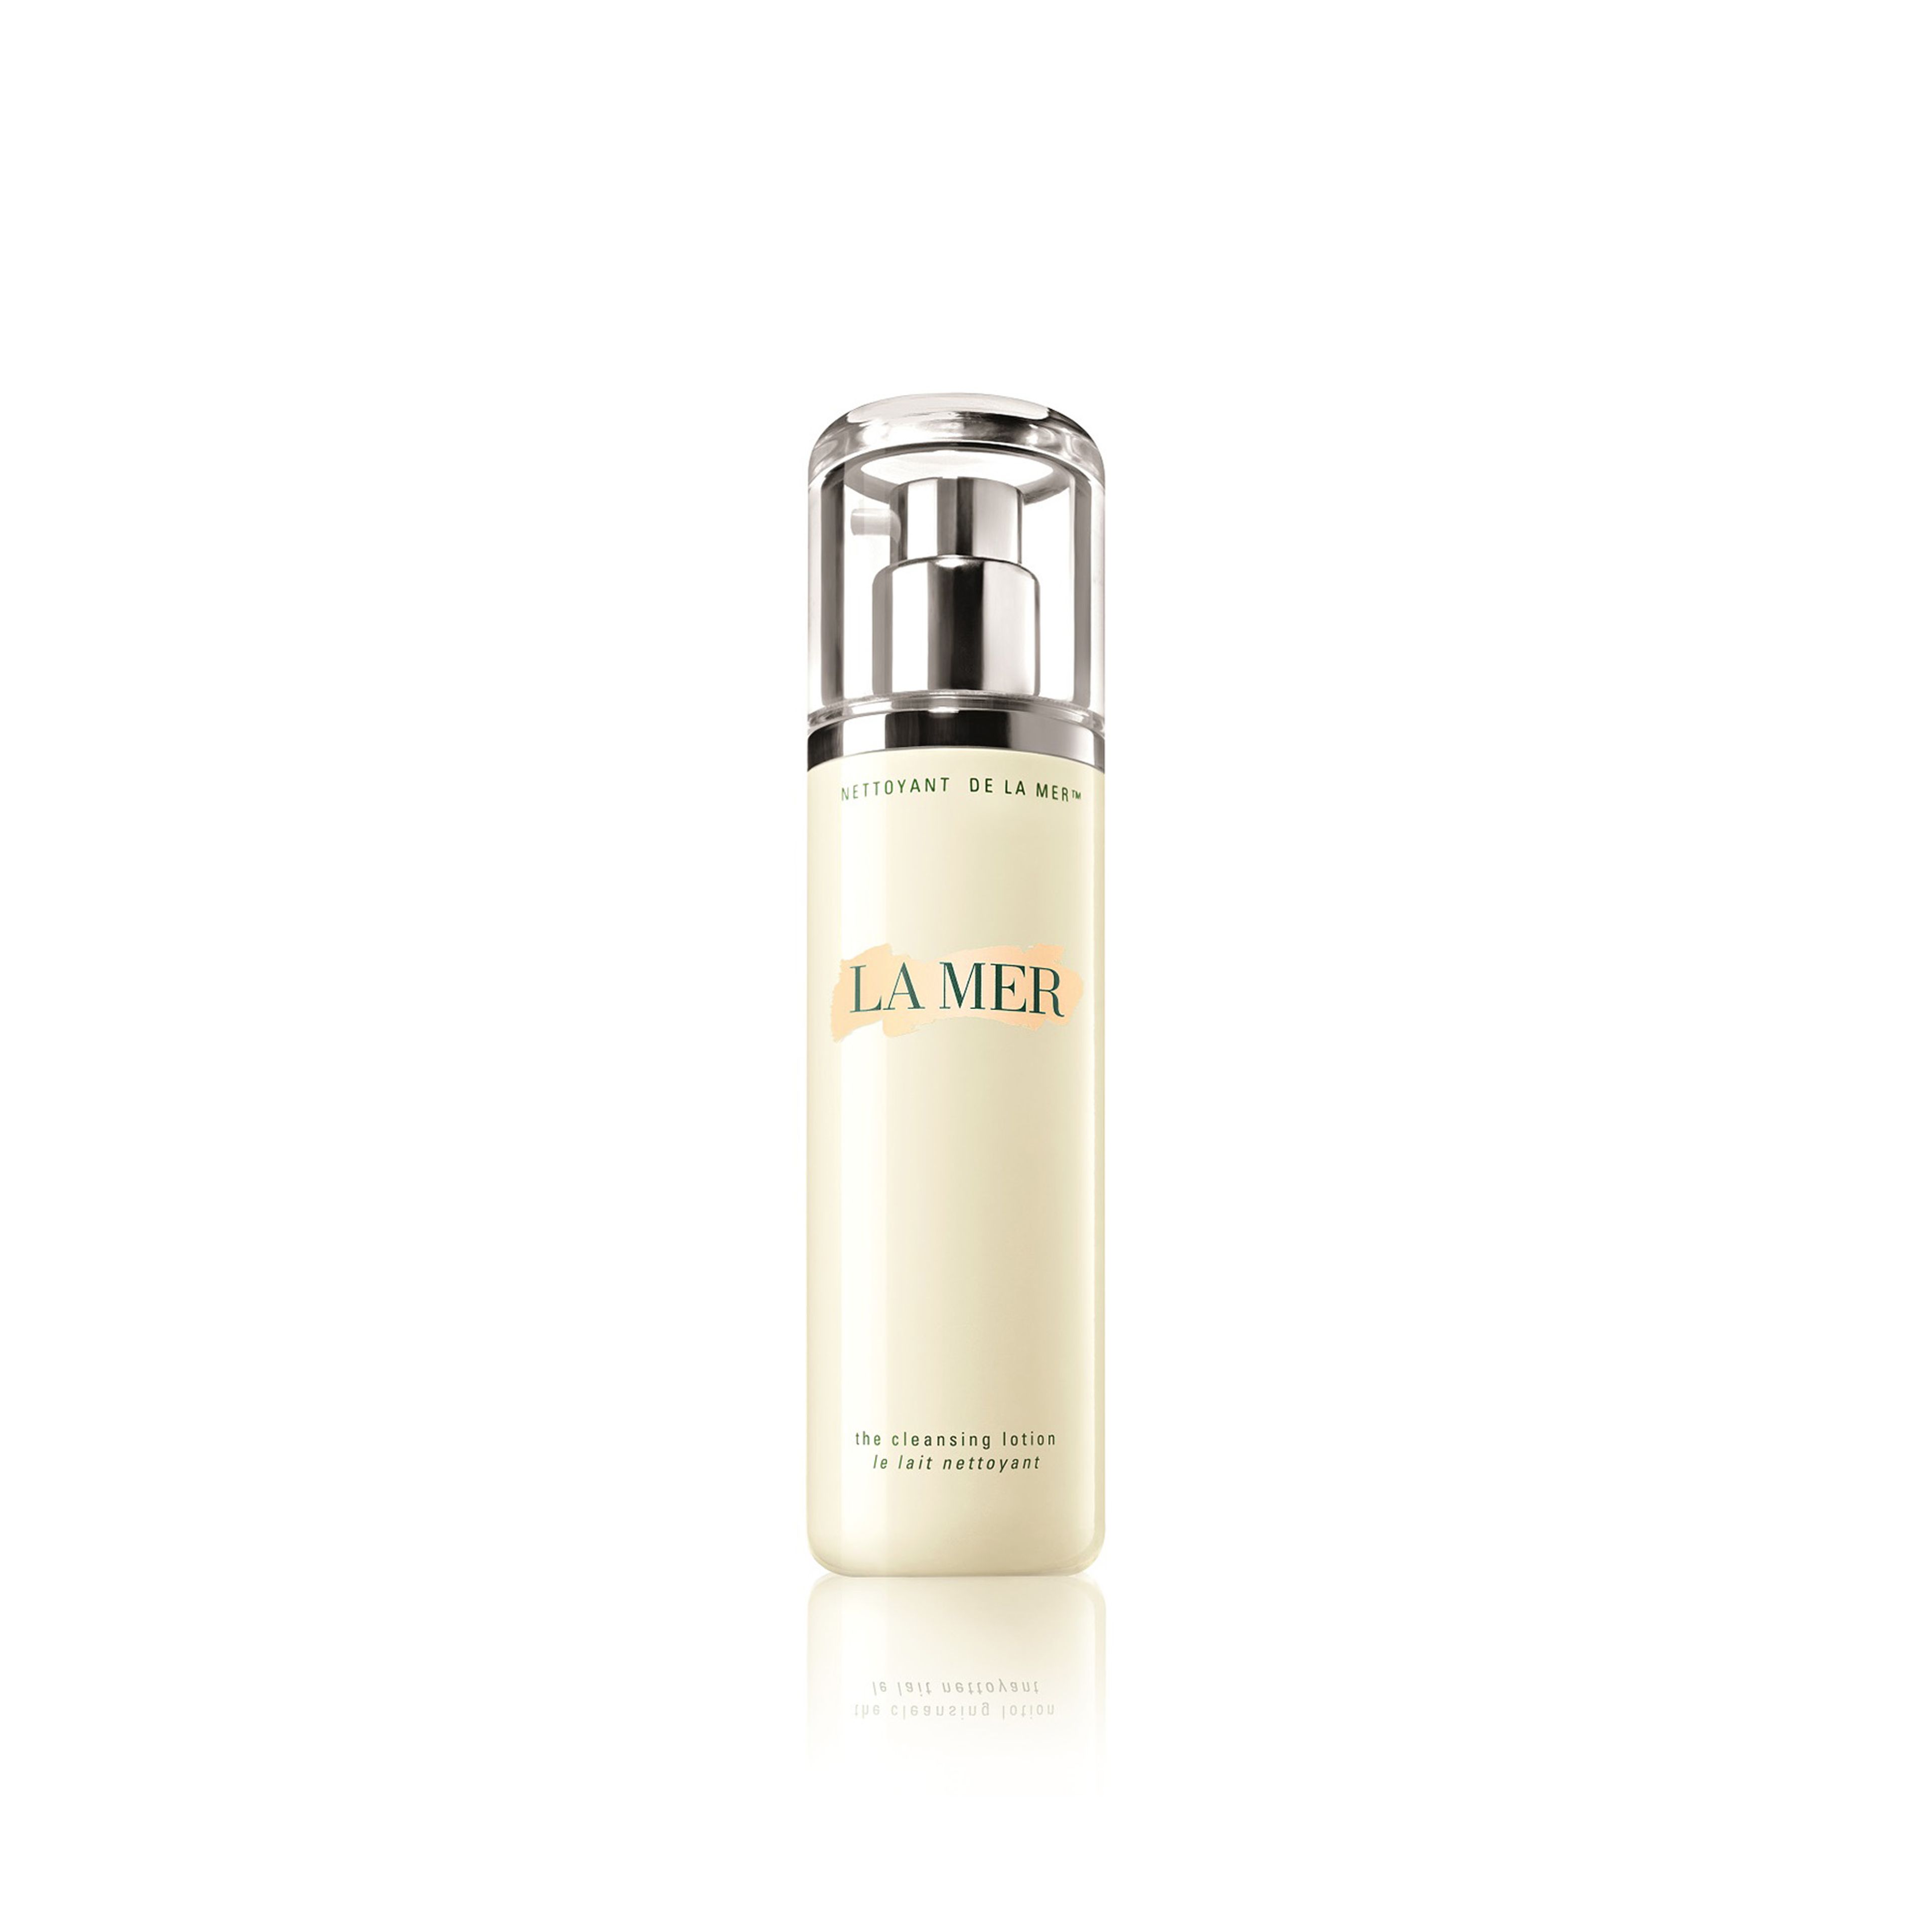 La Mer The Cleansing Lotion 1